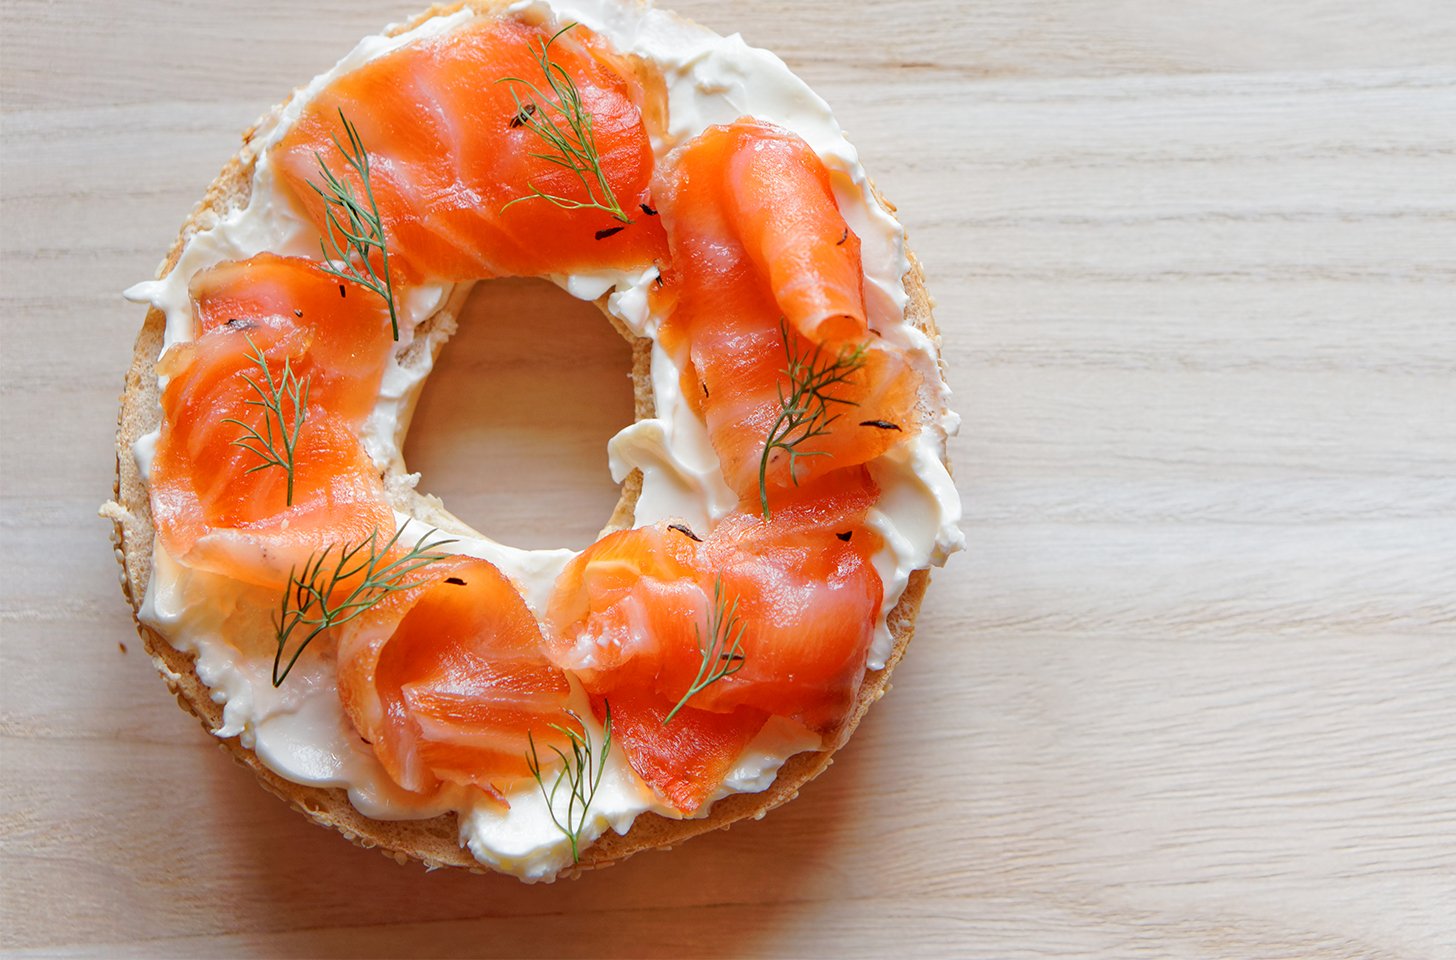 Salmon Recalled due To Listeria. Check Your Lox